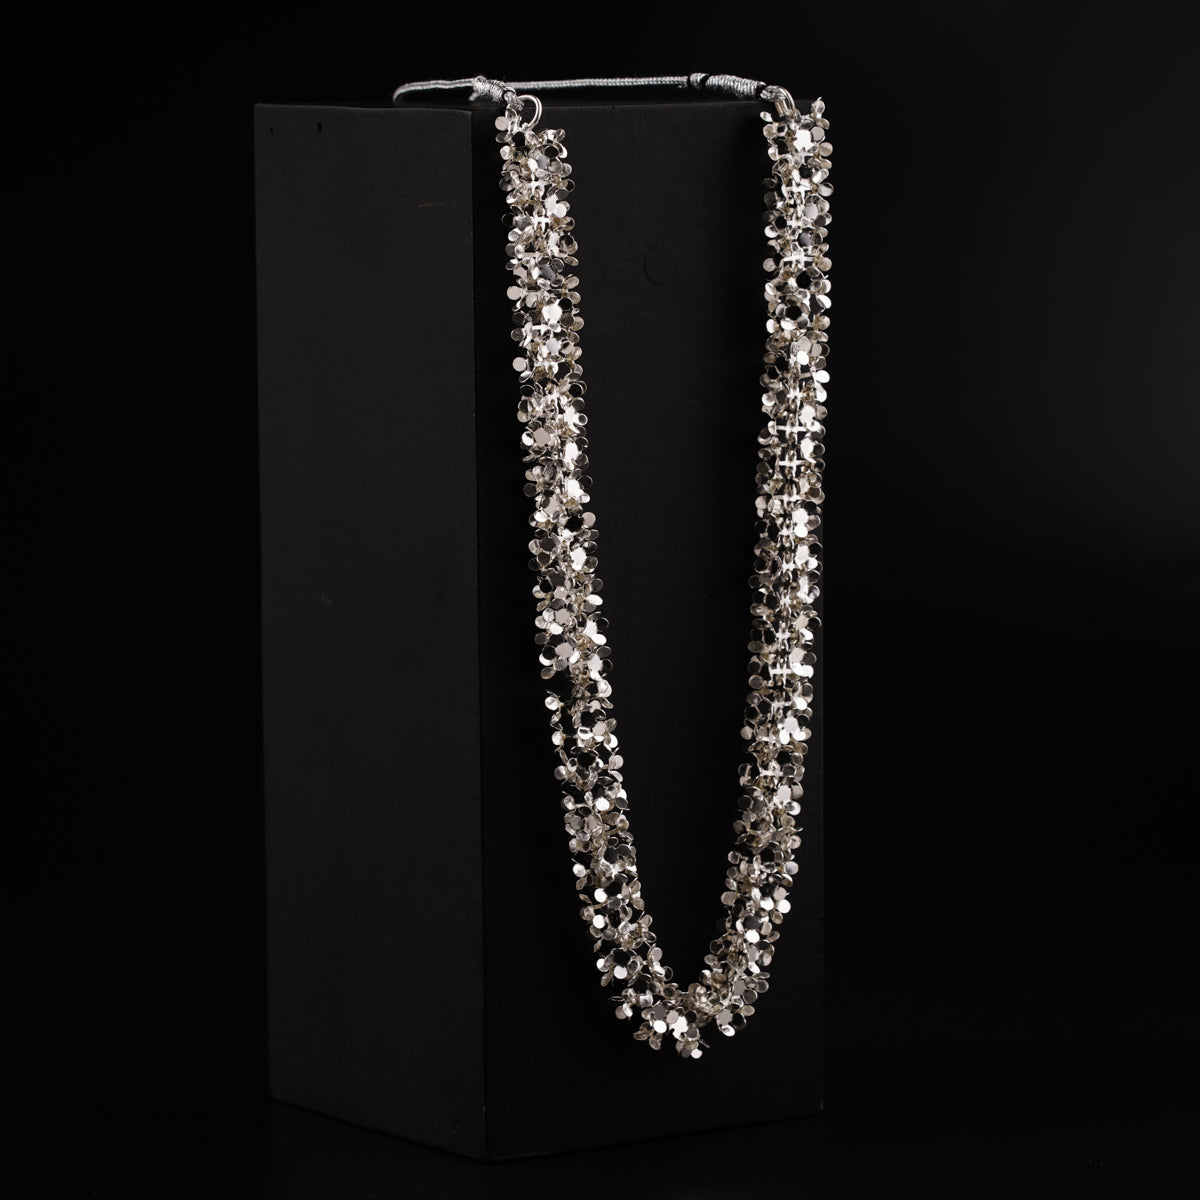 a long necklace is on display in a black box